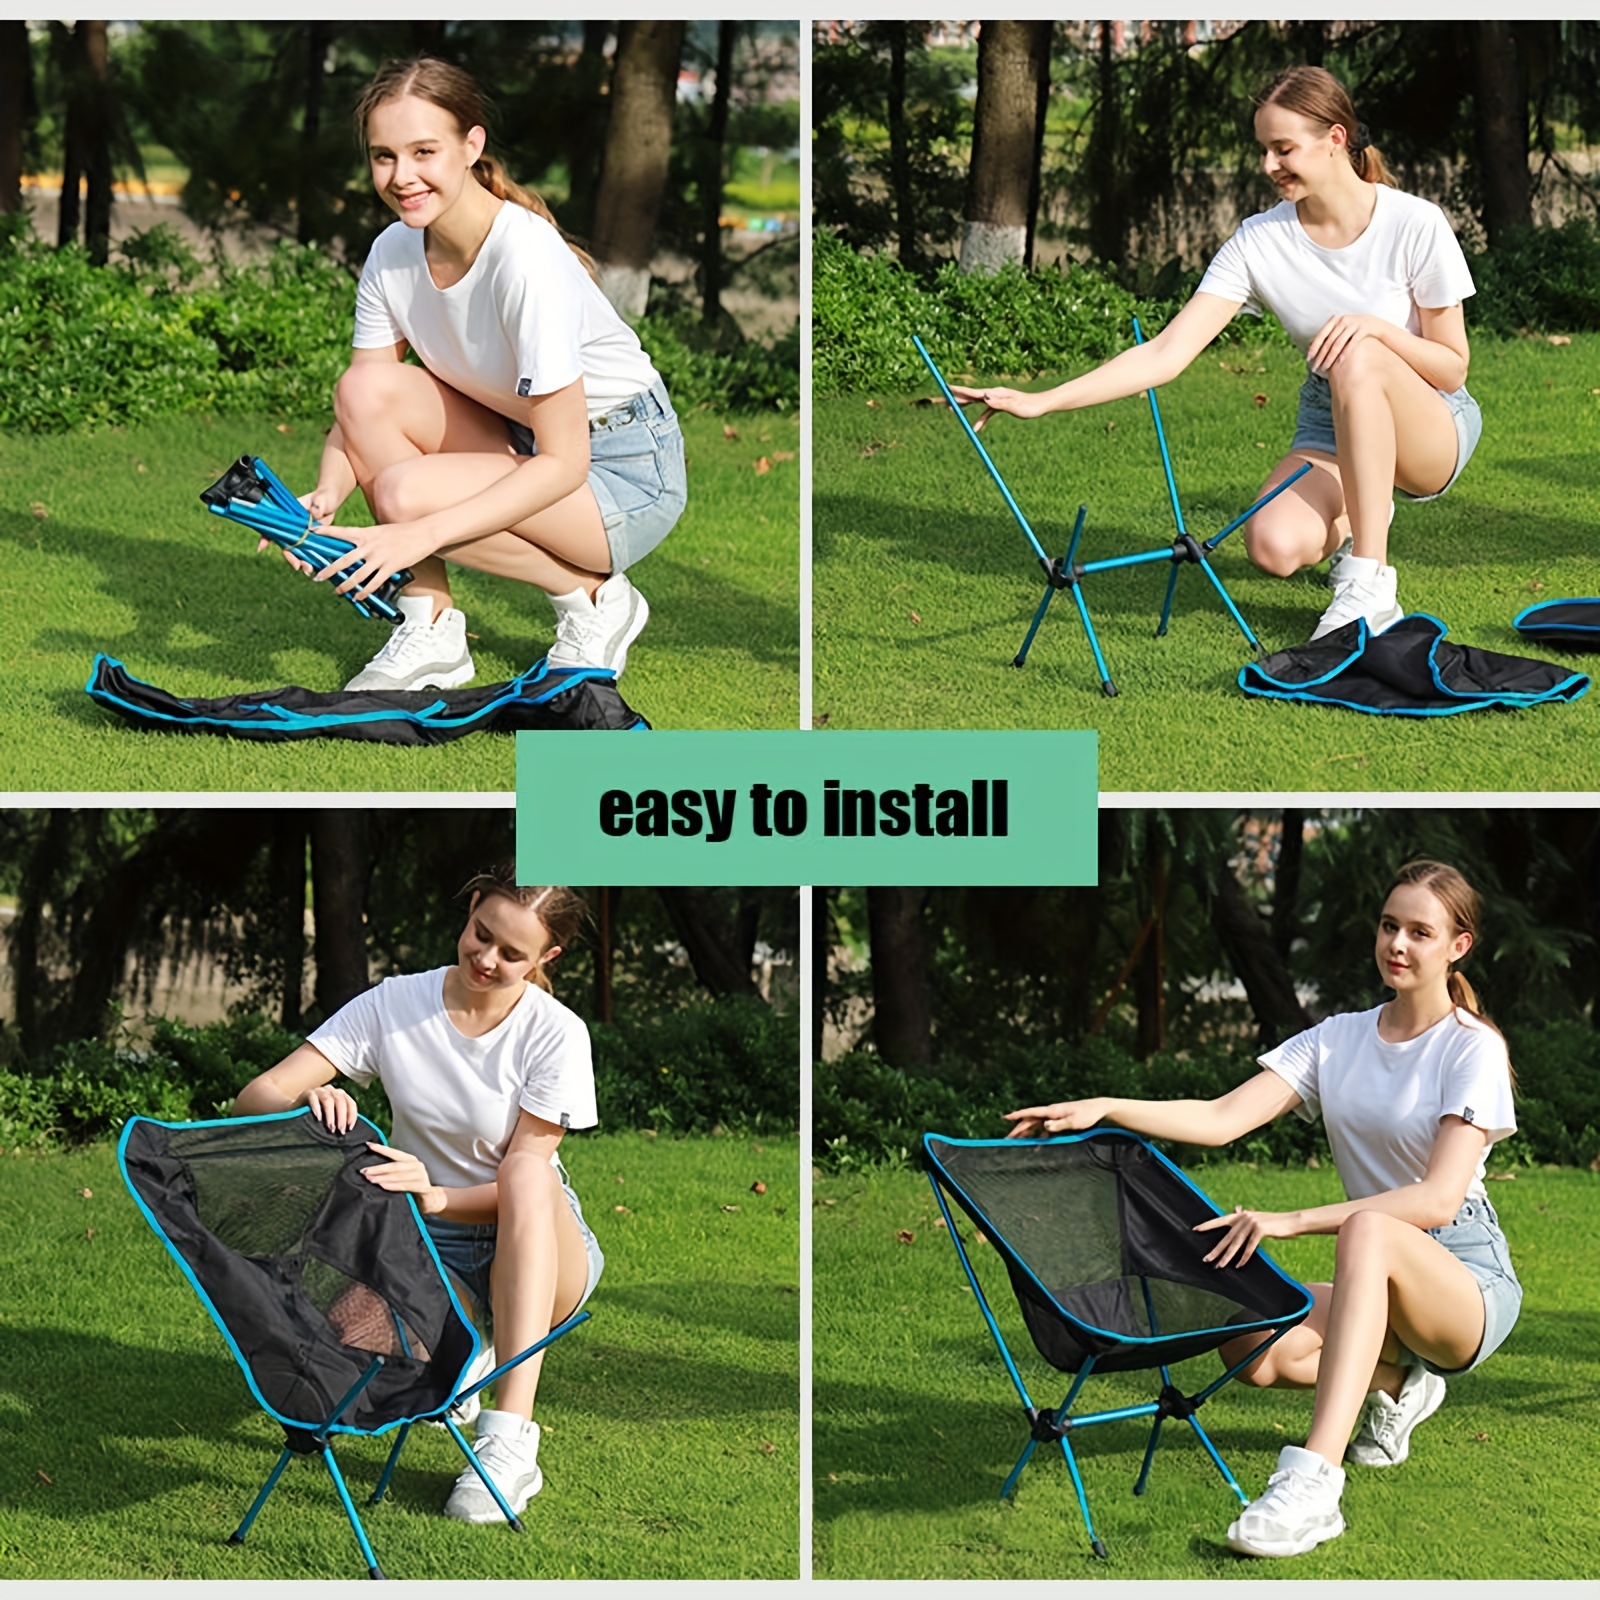 Lightweight Portable Folding Camping Chair Perfect For Outdoor